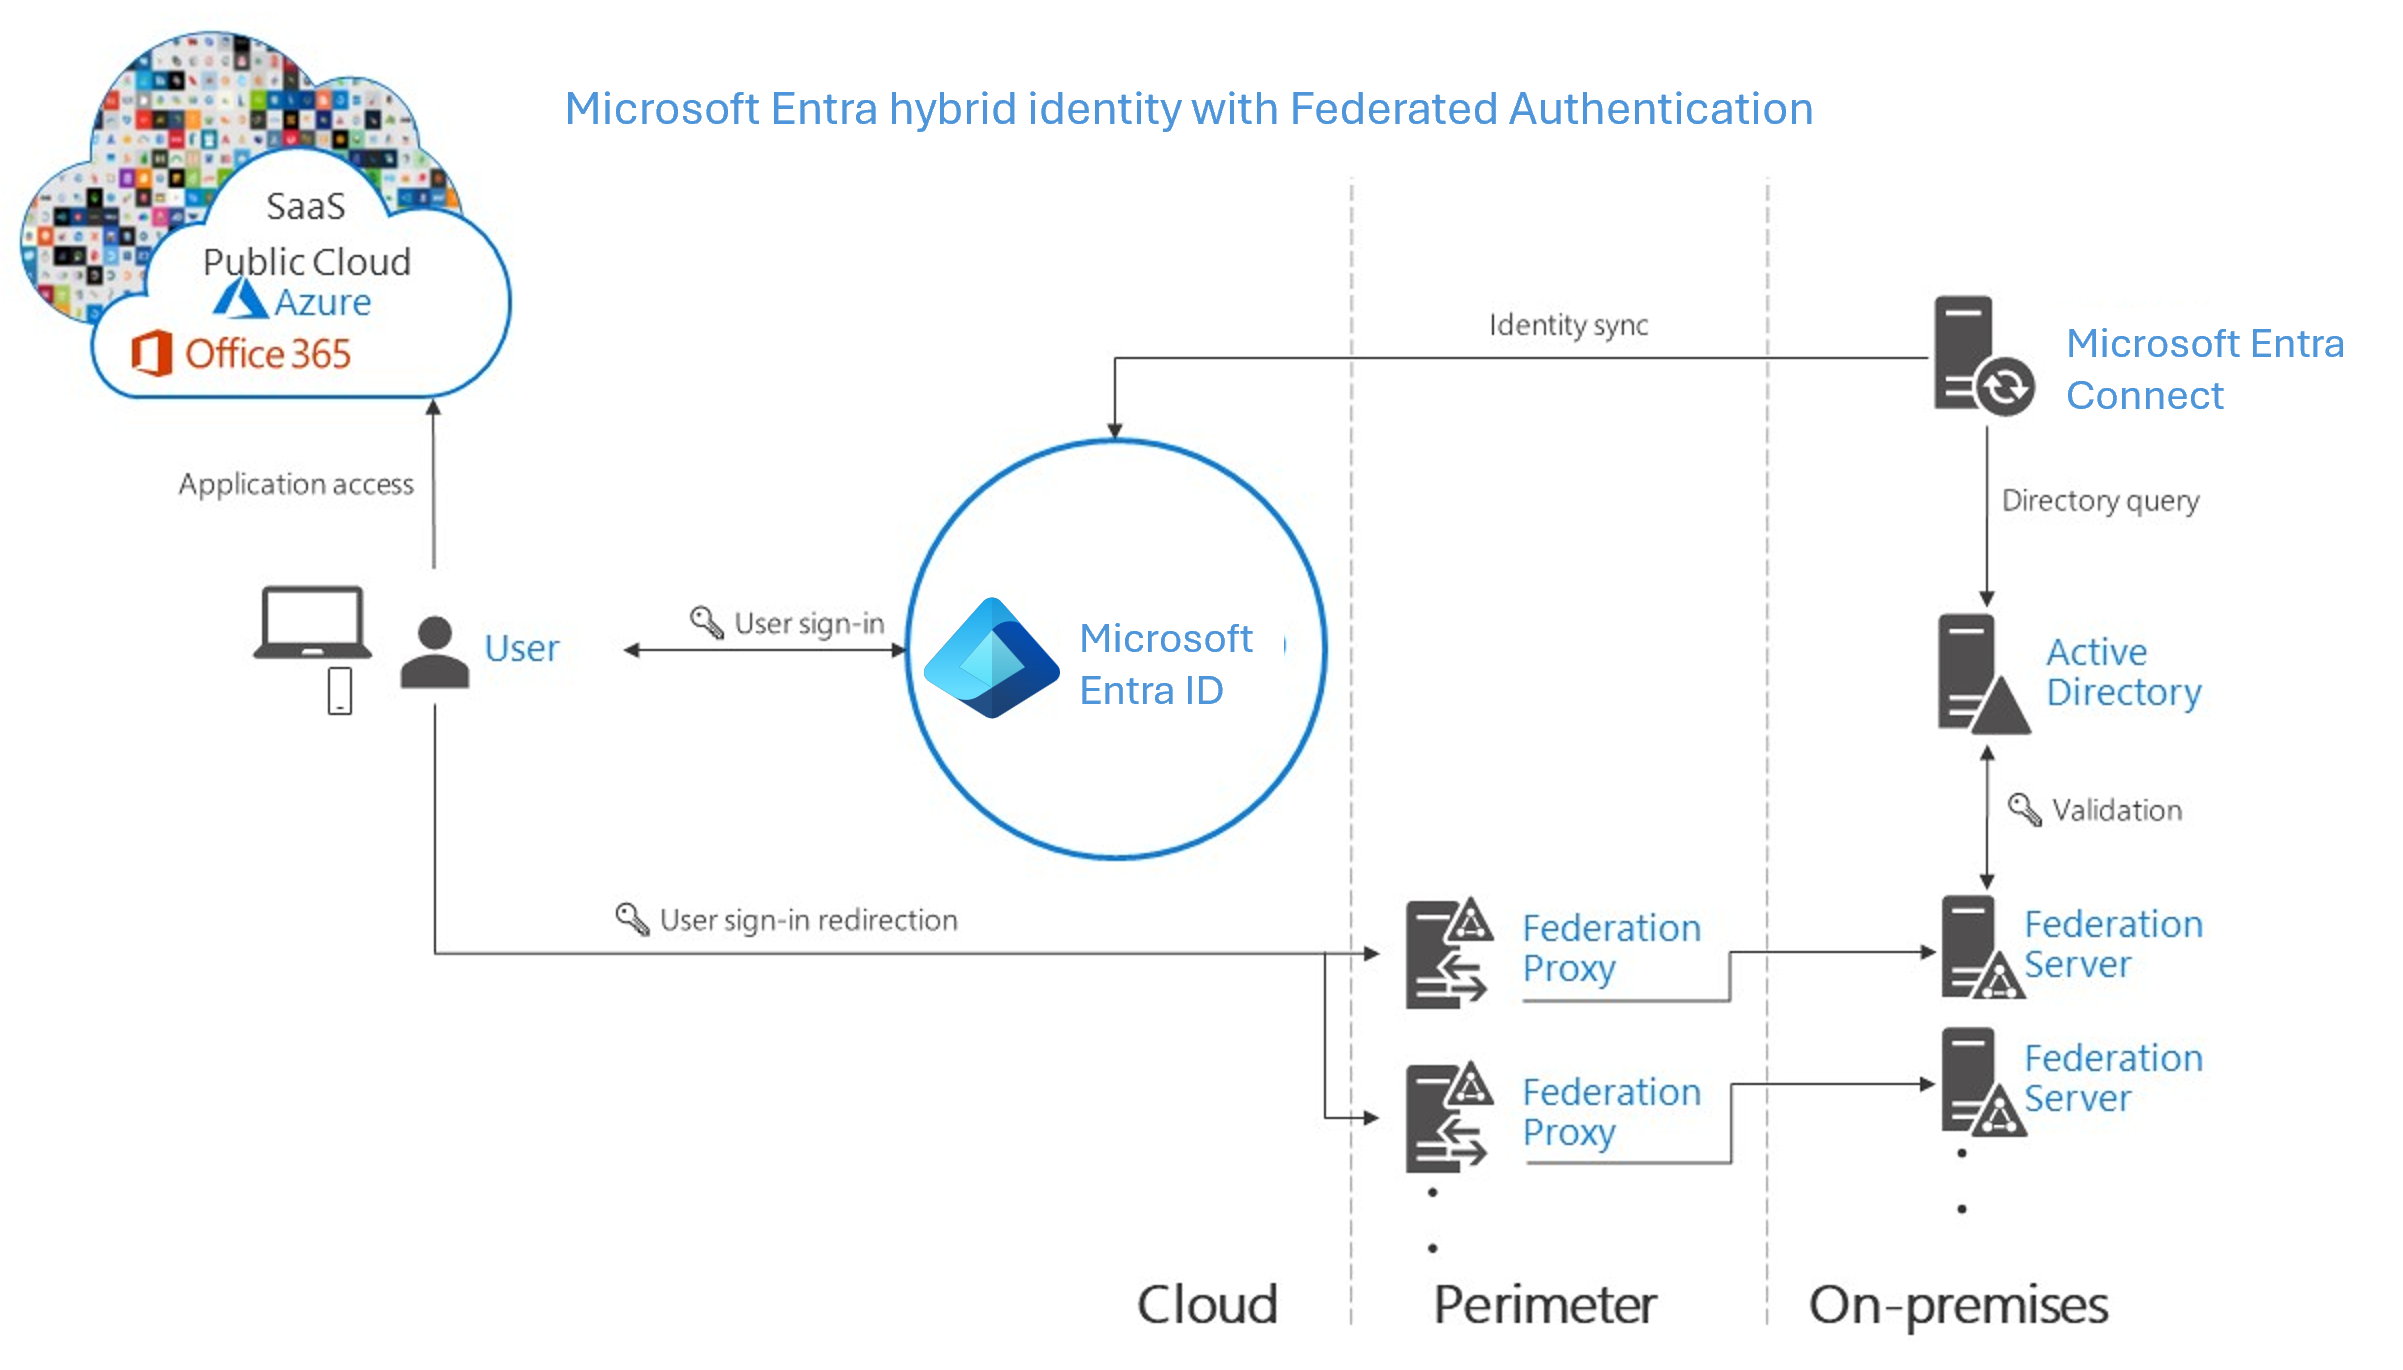 Screenshot of the Microsoft Entra hybrid identity with federated authentication selected.